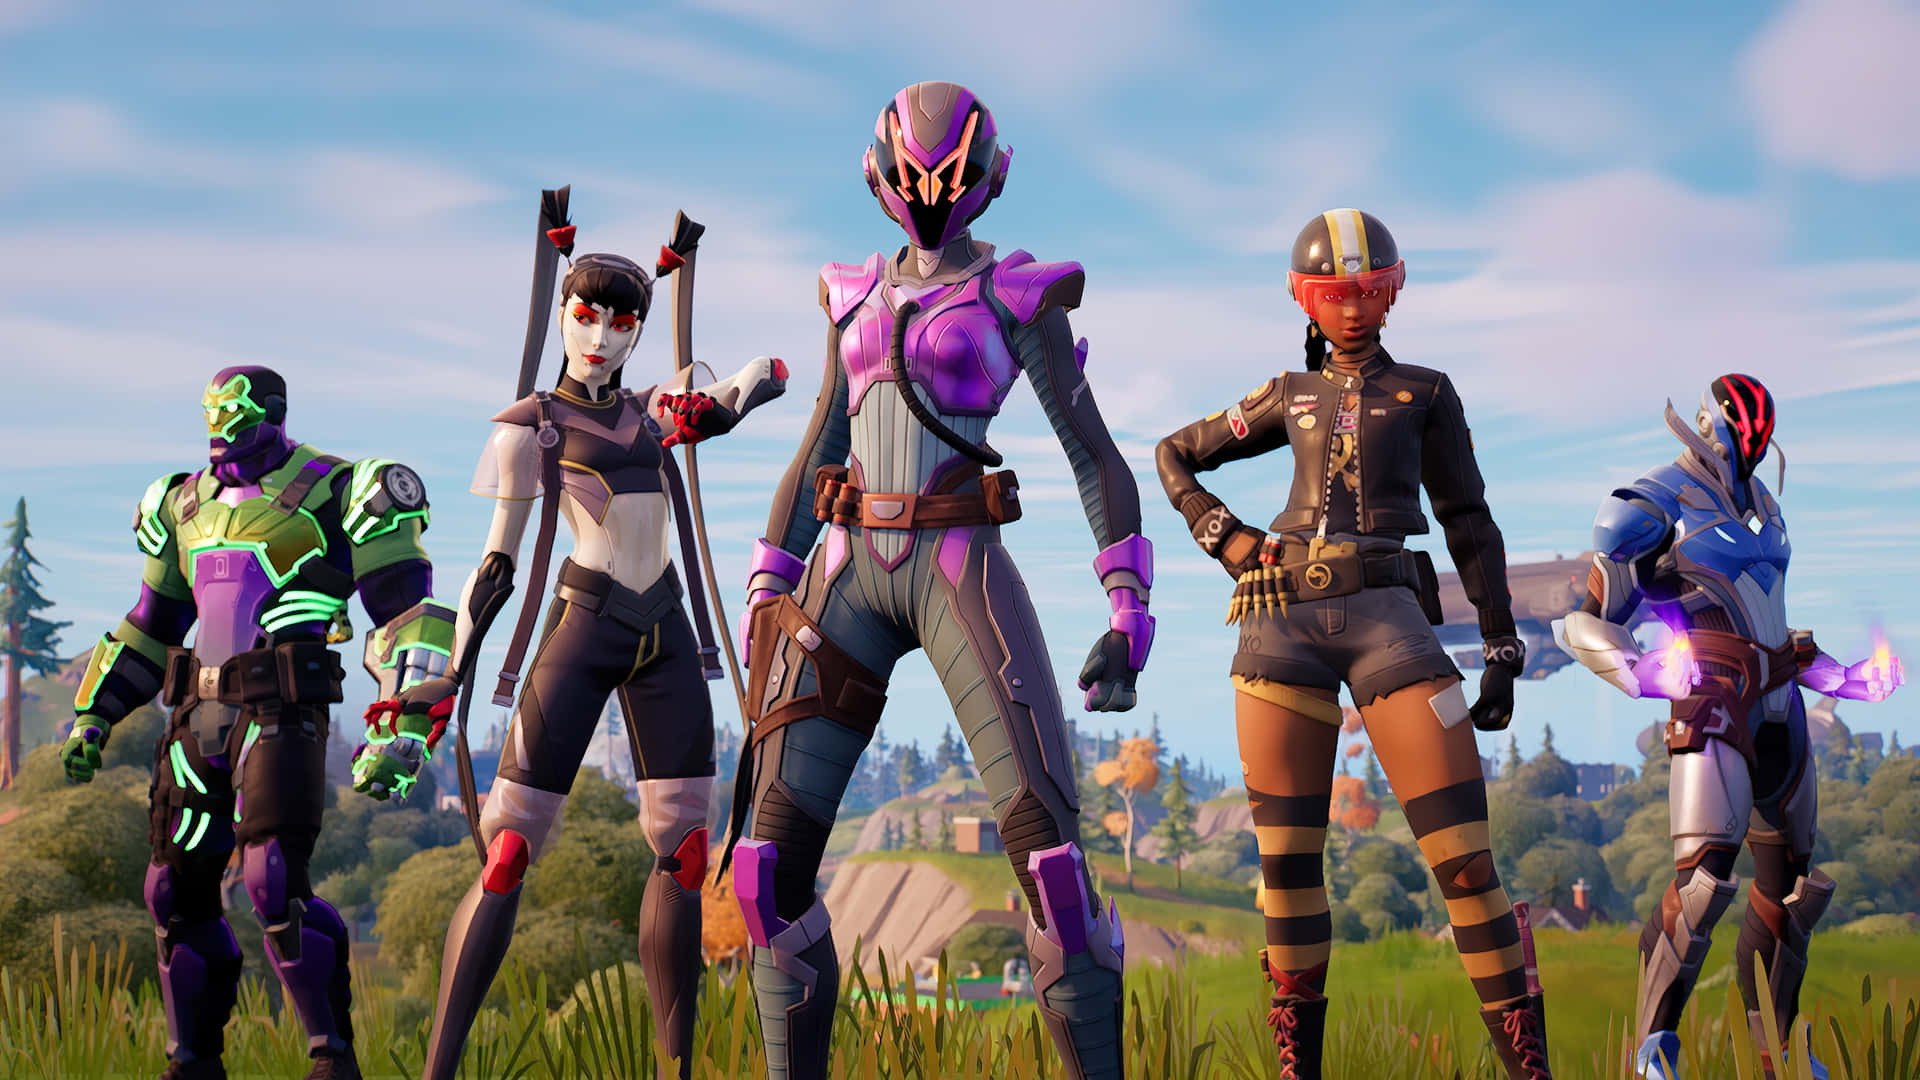 Fortnite - A Group Of Characters Standing In A Field Wallpaper